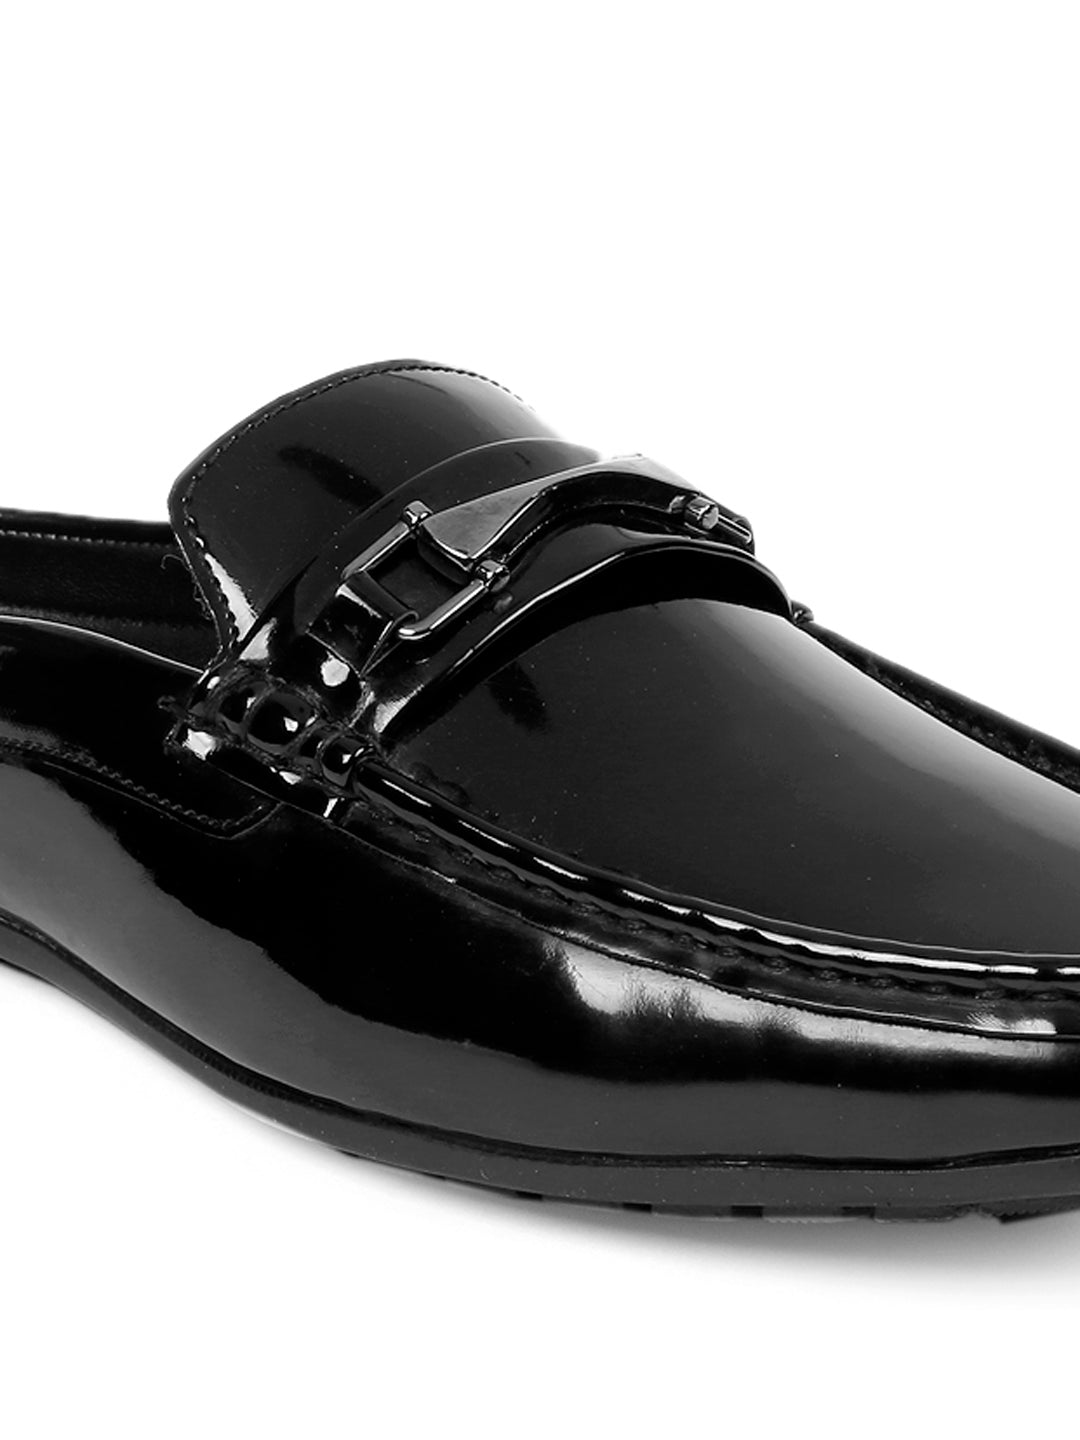 Bacca Bucci JAMBOREE Fashion Mules/Clogs/Backless Loafers for Party/Travel/Office-Shiny Black